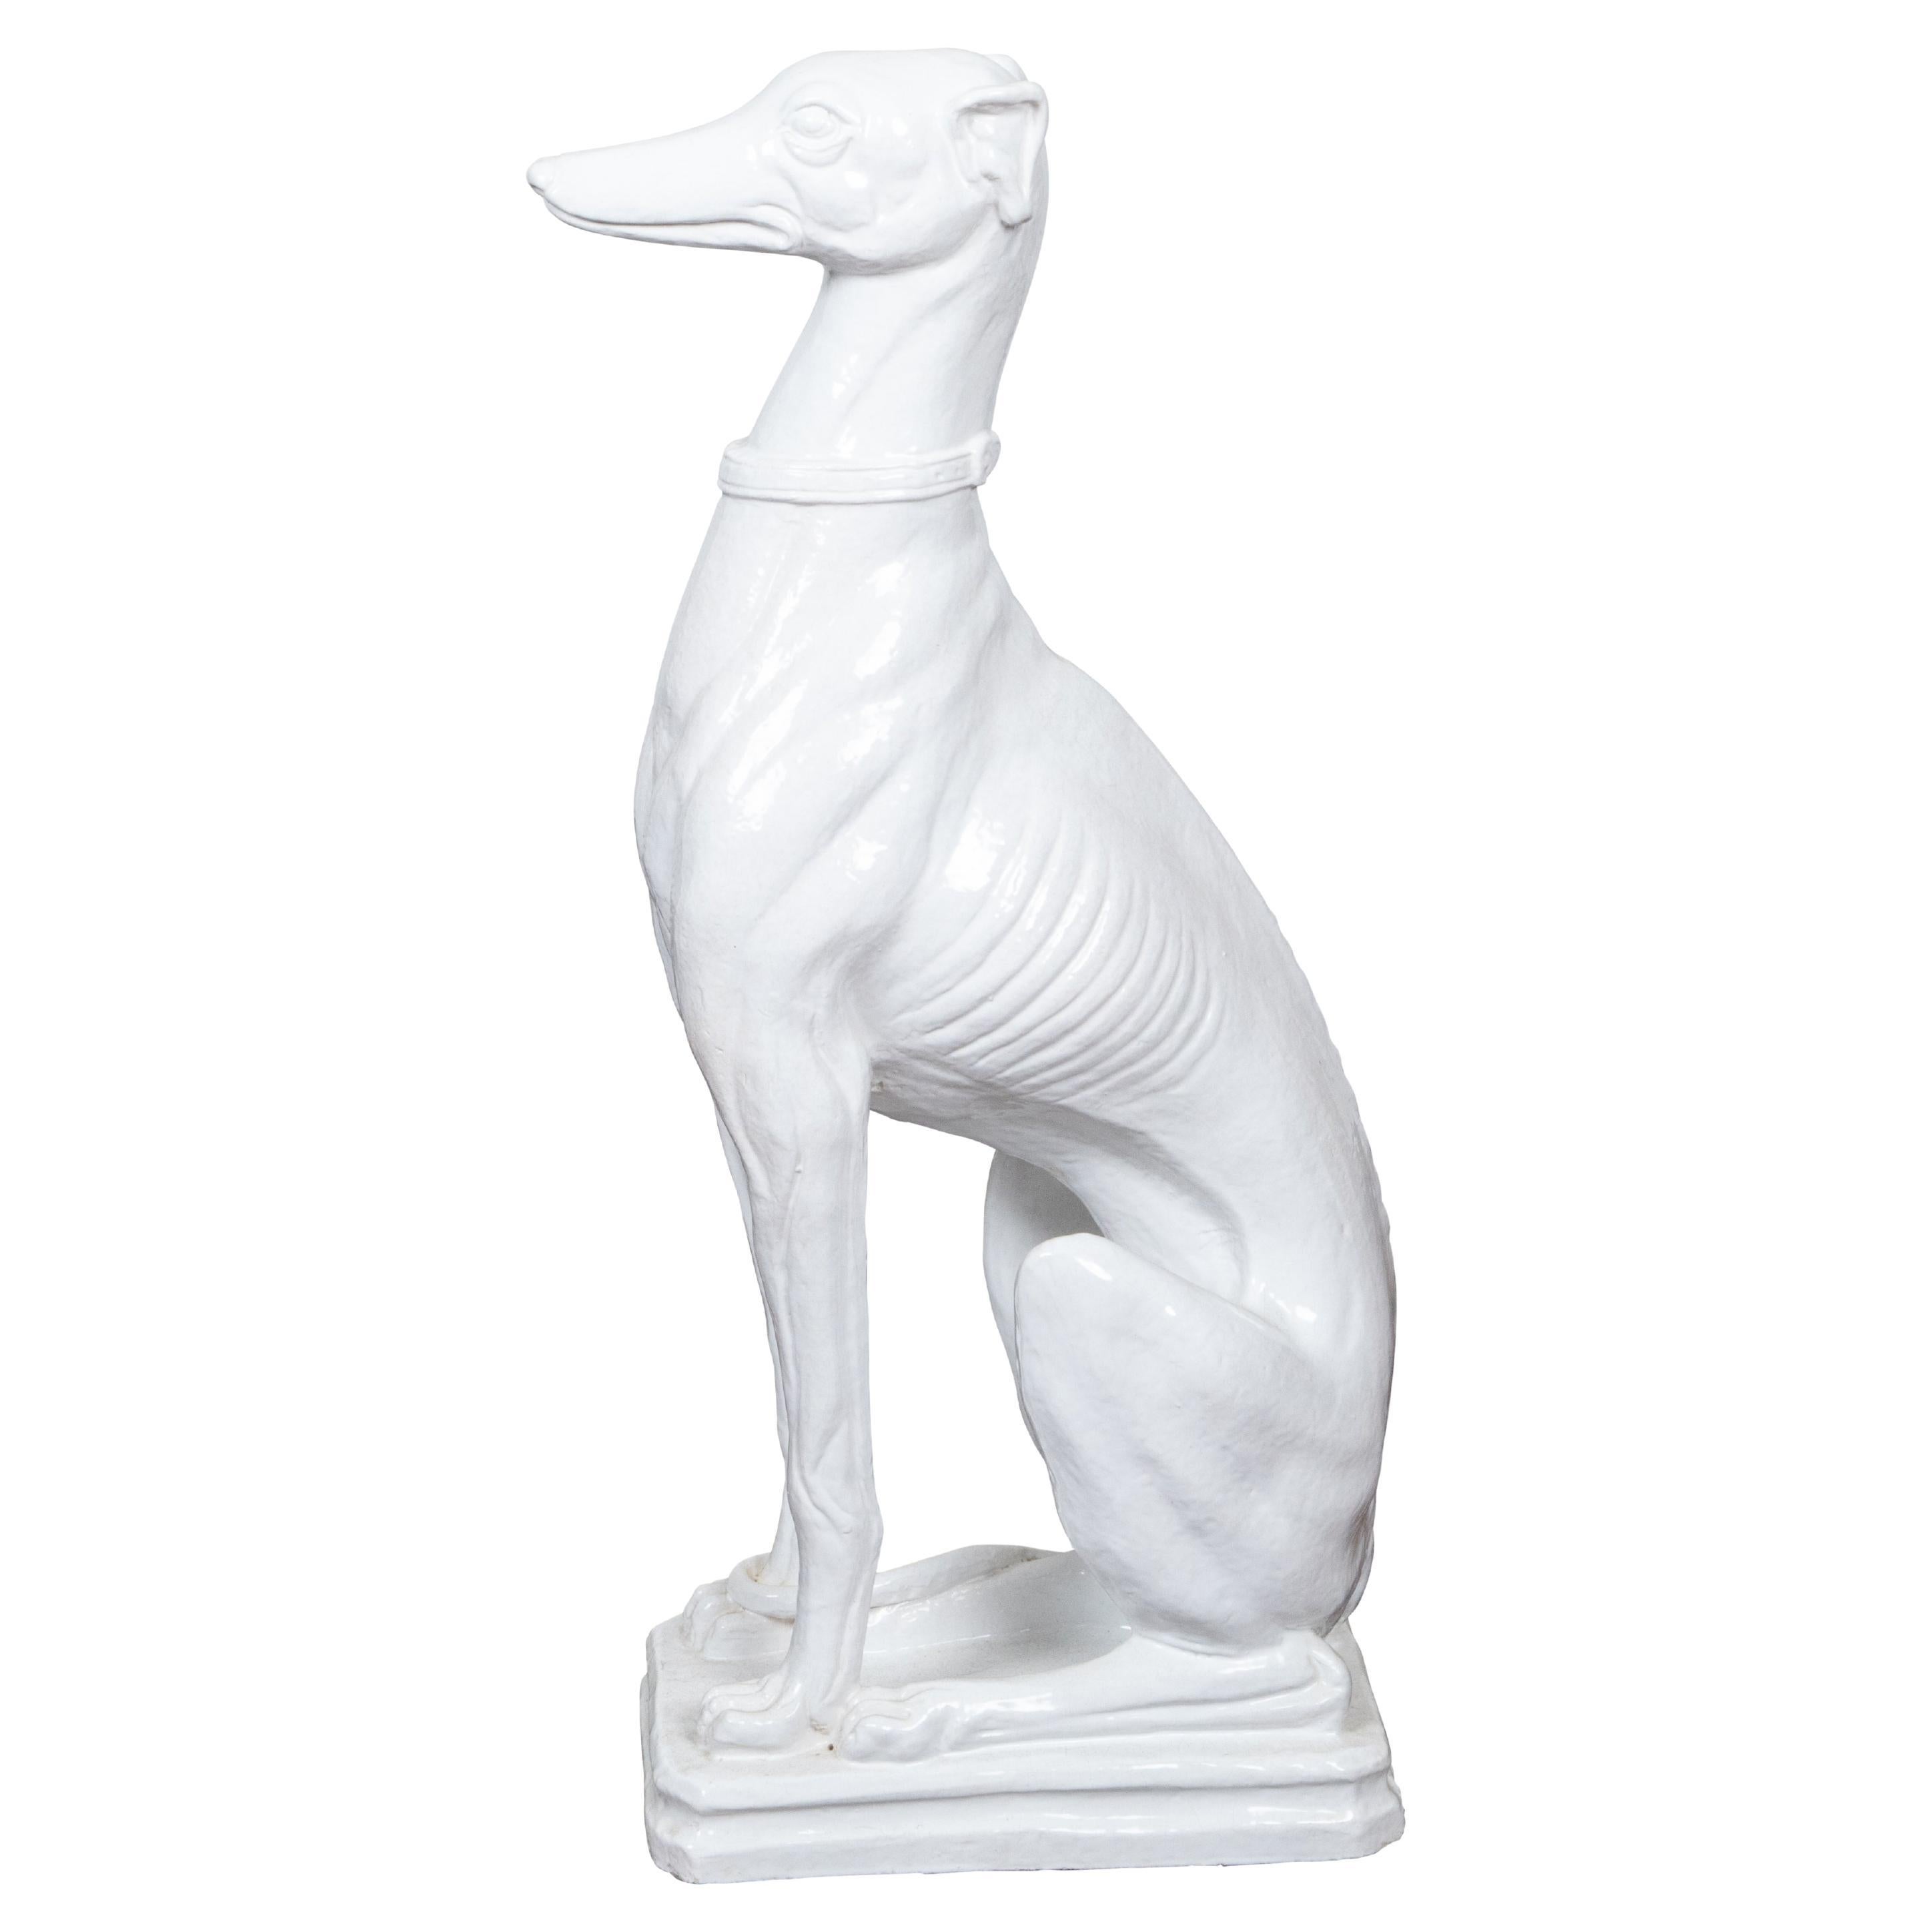 Midcentury Italian White Porcelain Sculpture of a Calm, Sitting Greyhound For Sale